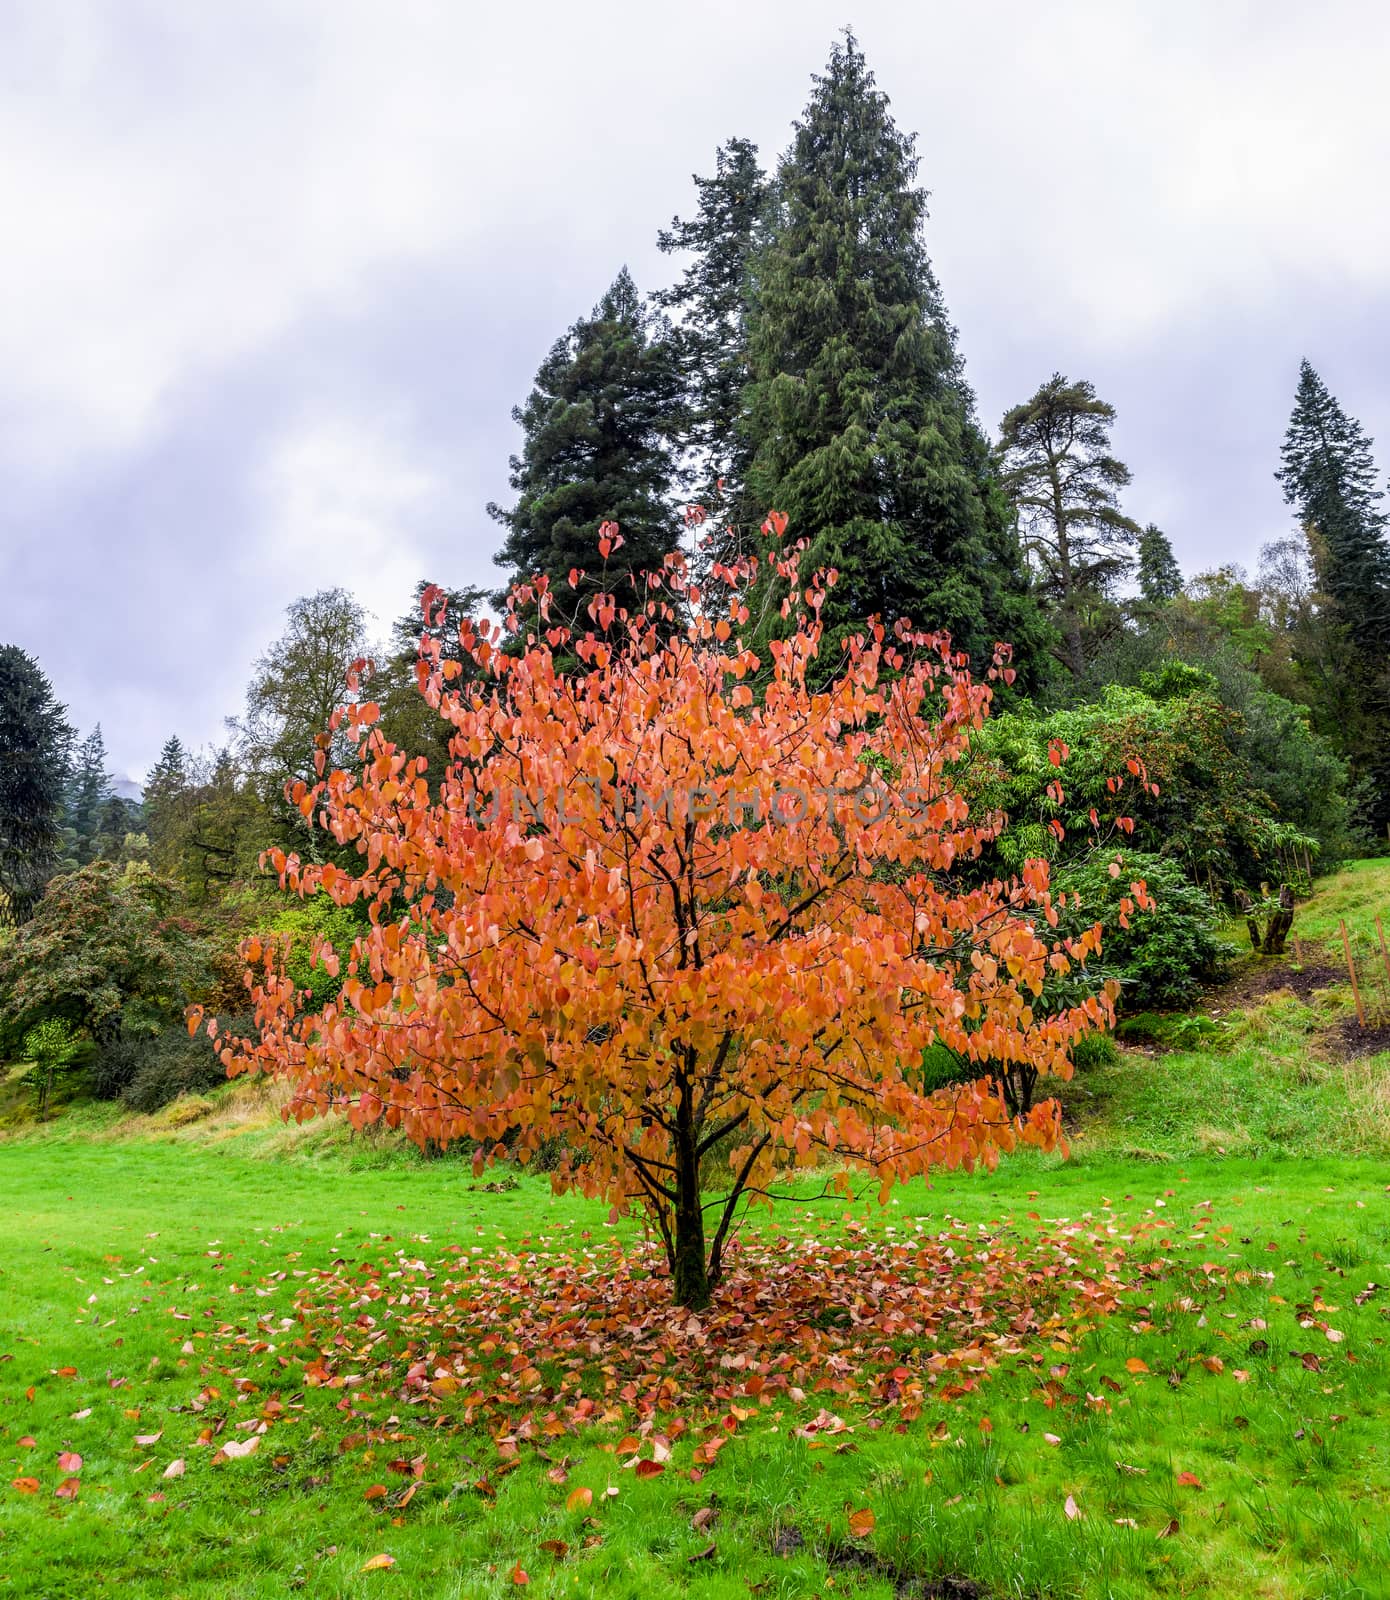 Falling leaves from a beautiful chinese tree (Davidia Involucrata) during autumn season in Benmore Botanic Garden, Loch Lomond and the Trossachs National Park, Scotland